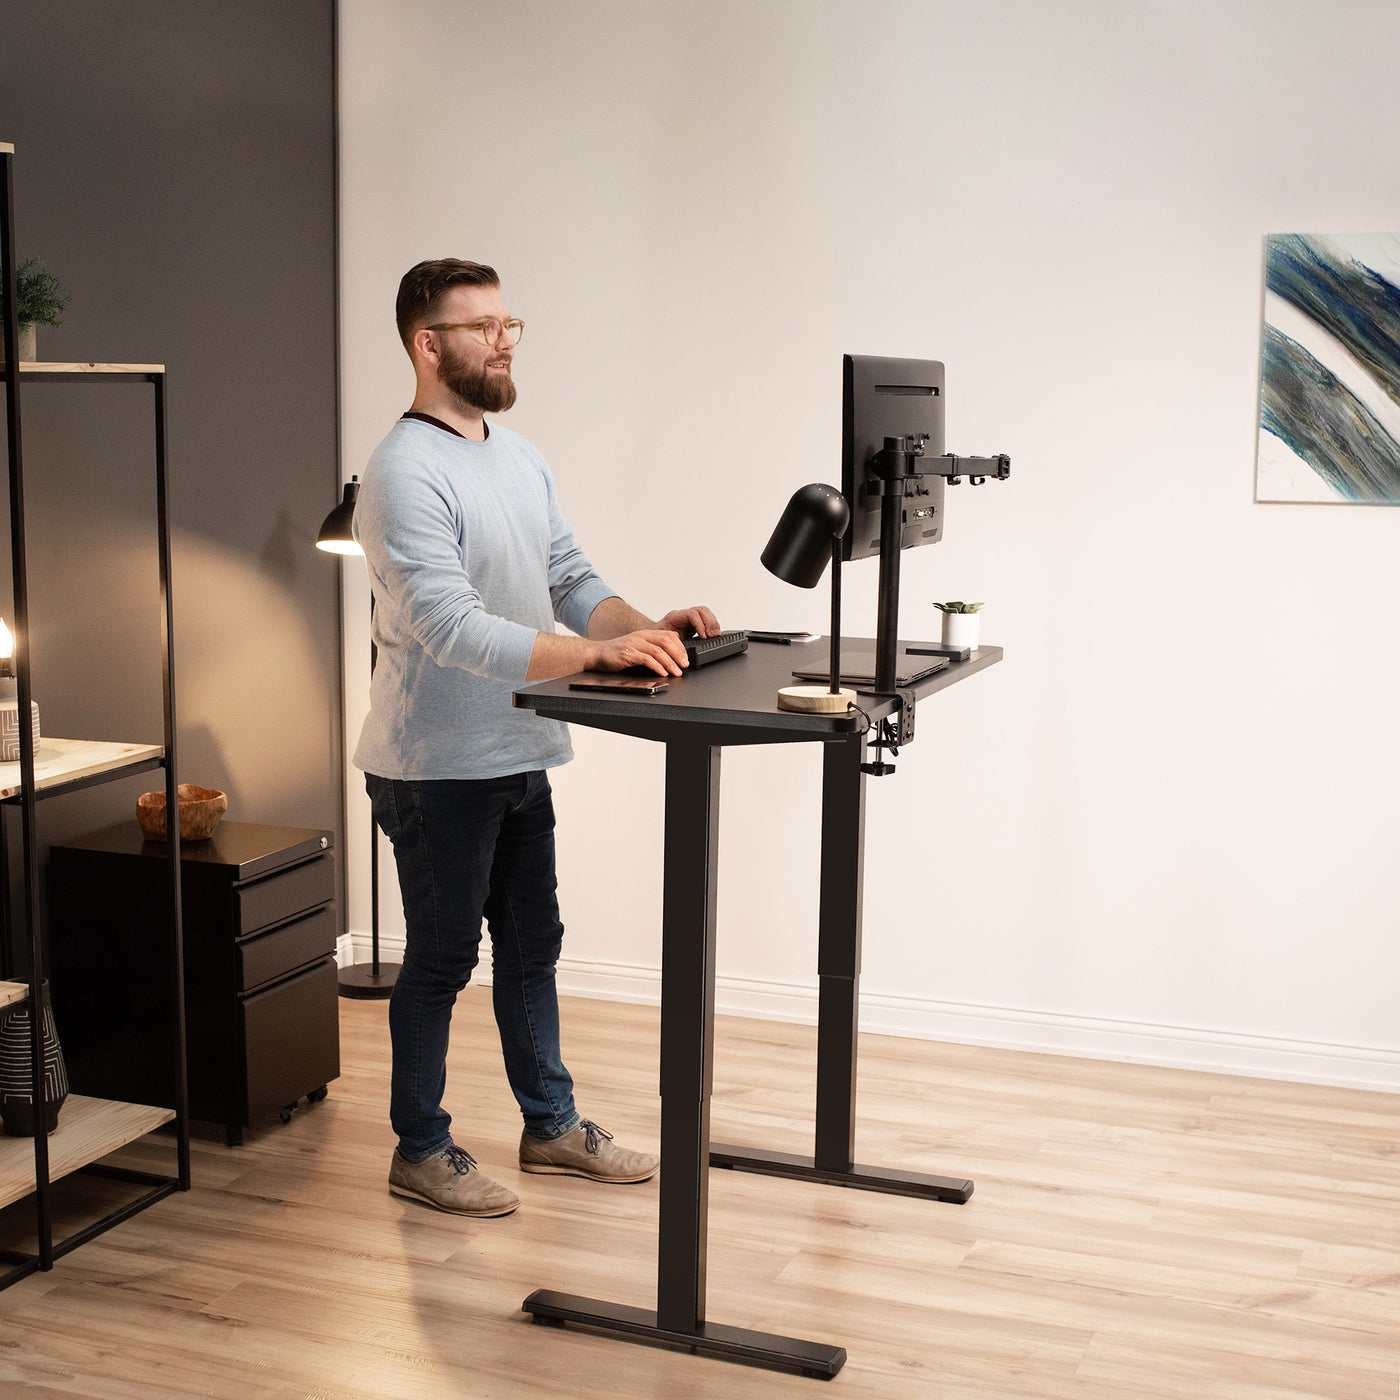 A man working at a standing desk.